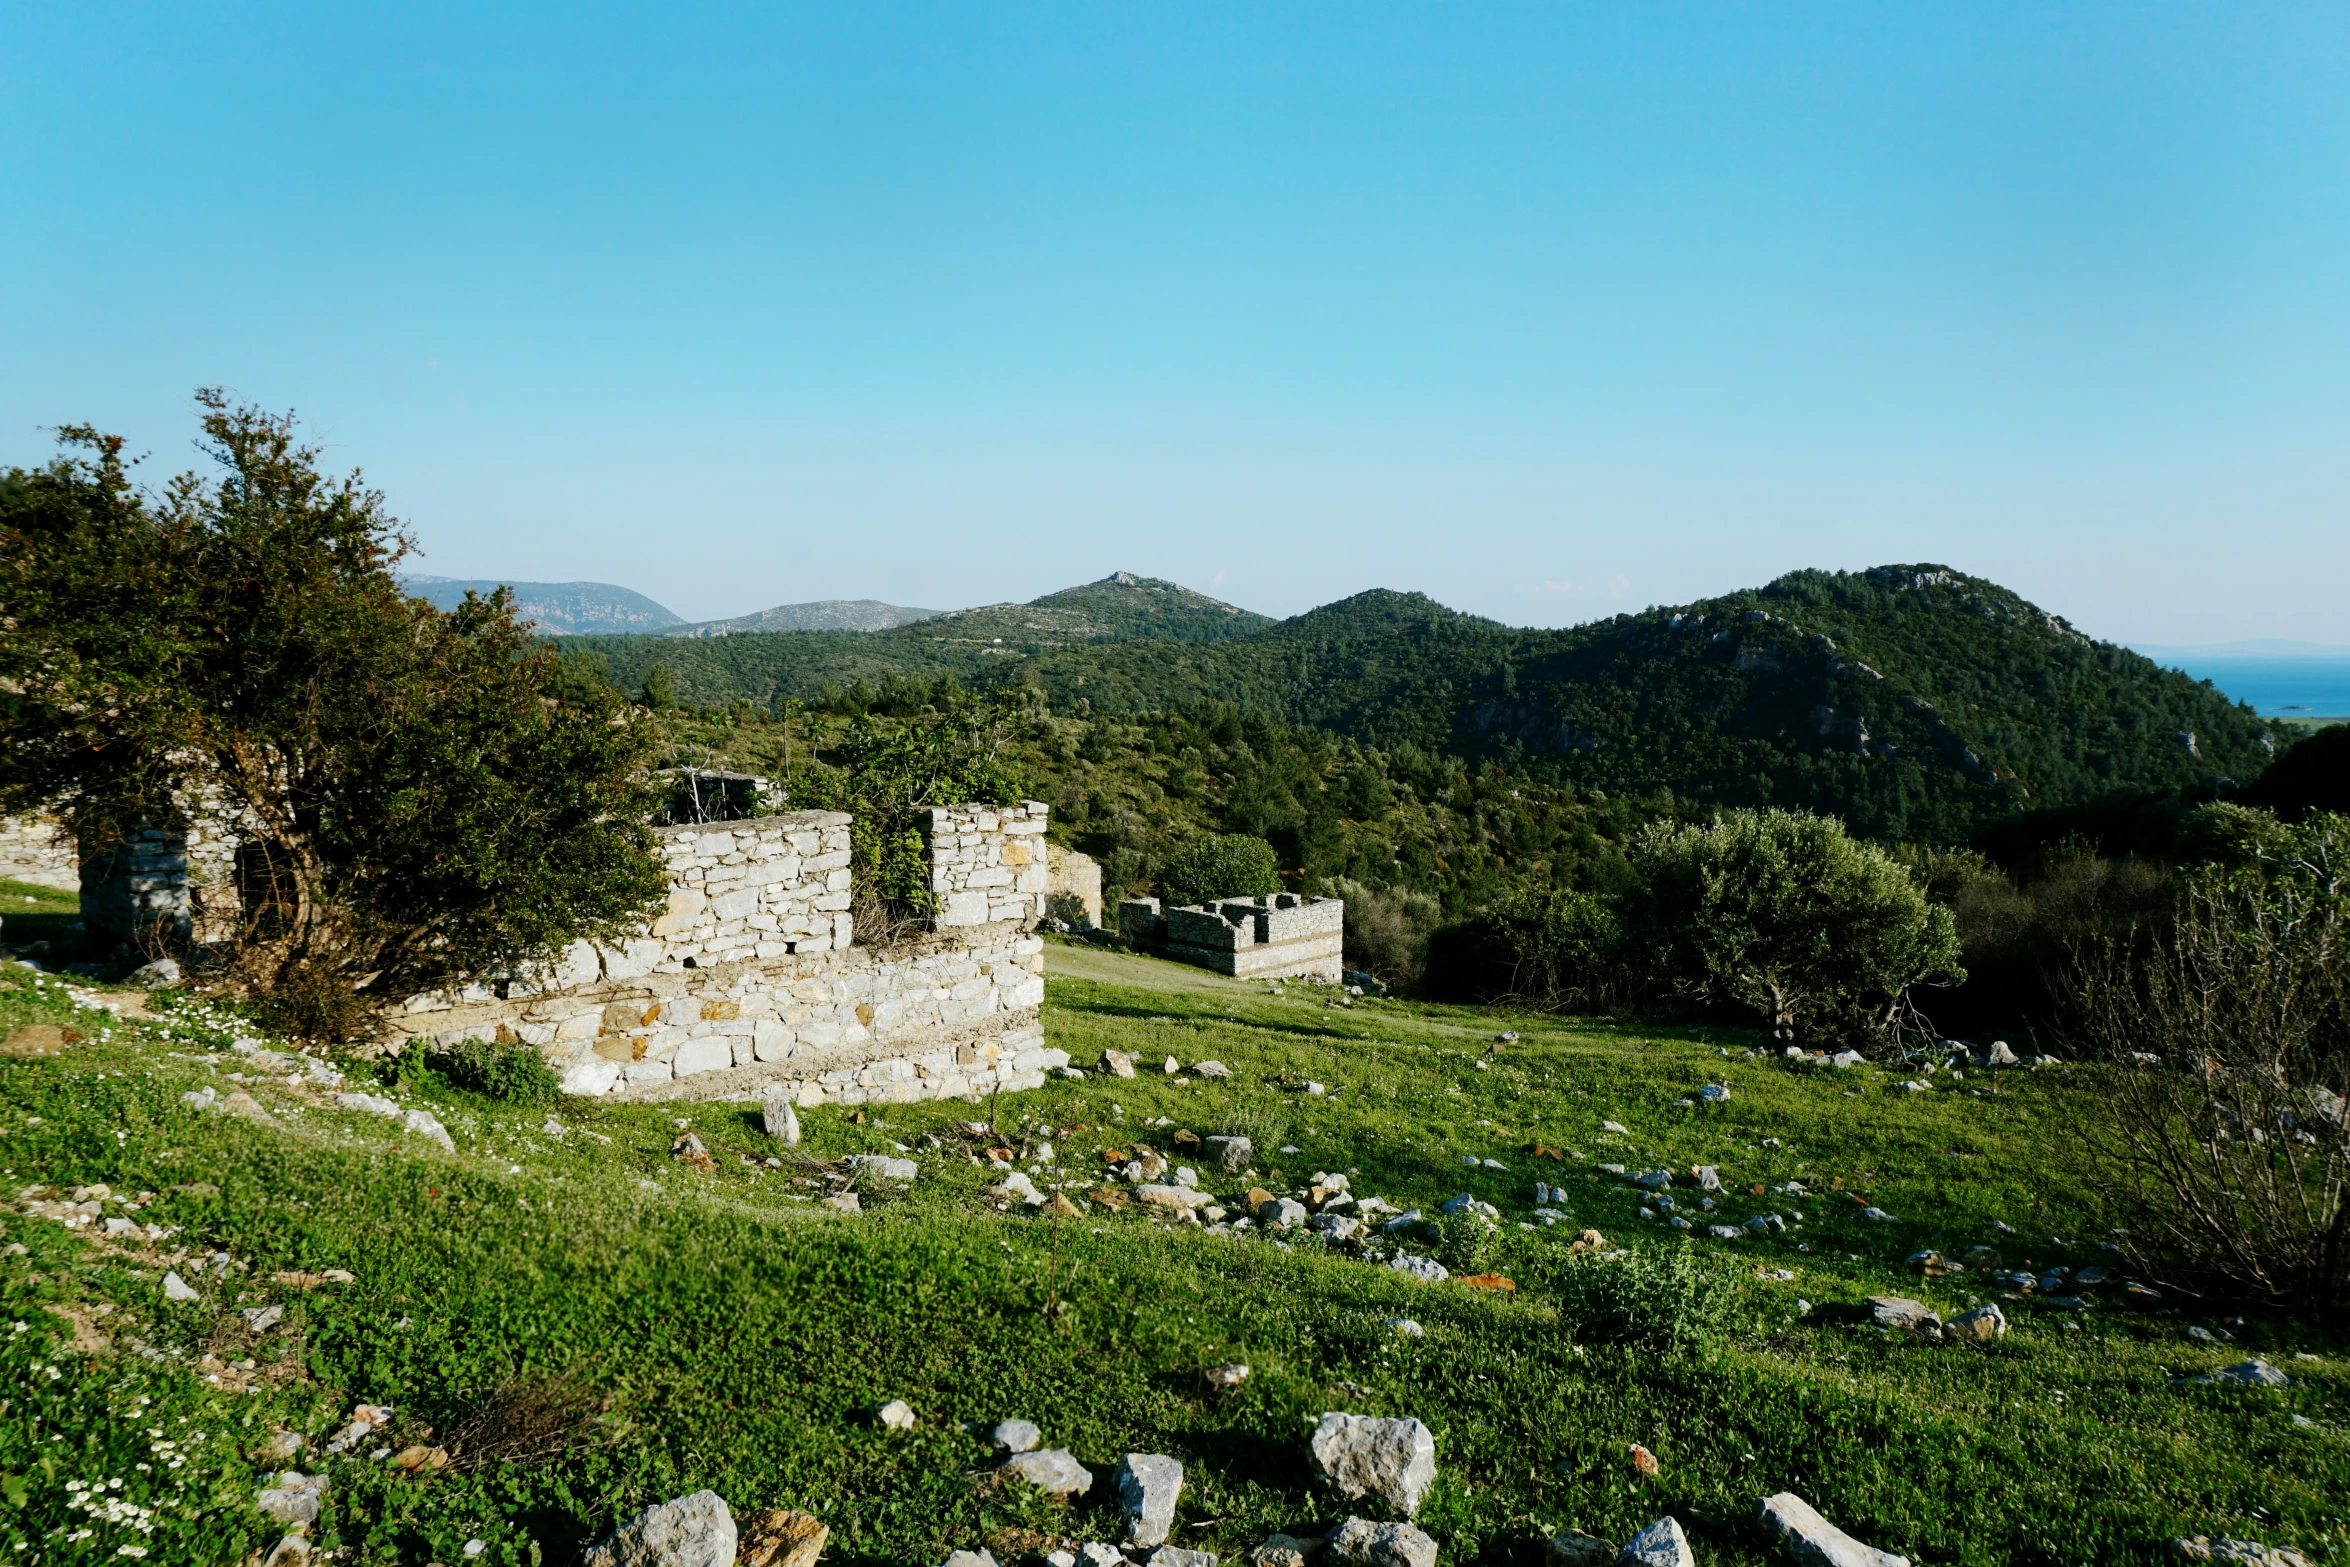 stone castle ruins on the side of a mountain in the mountains